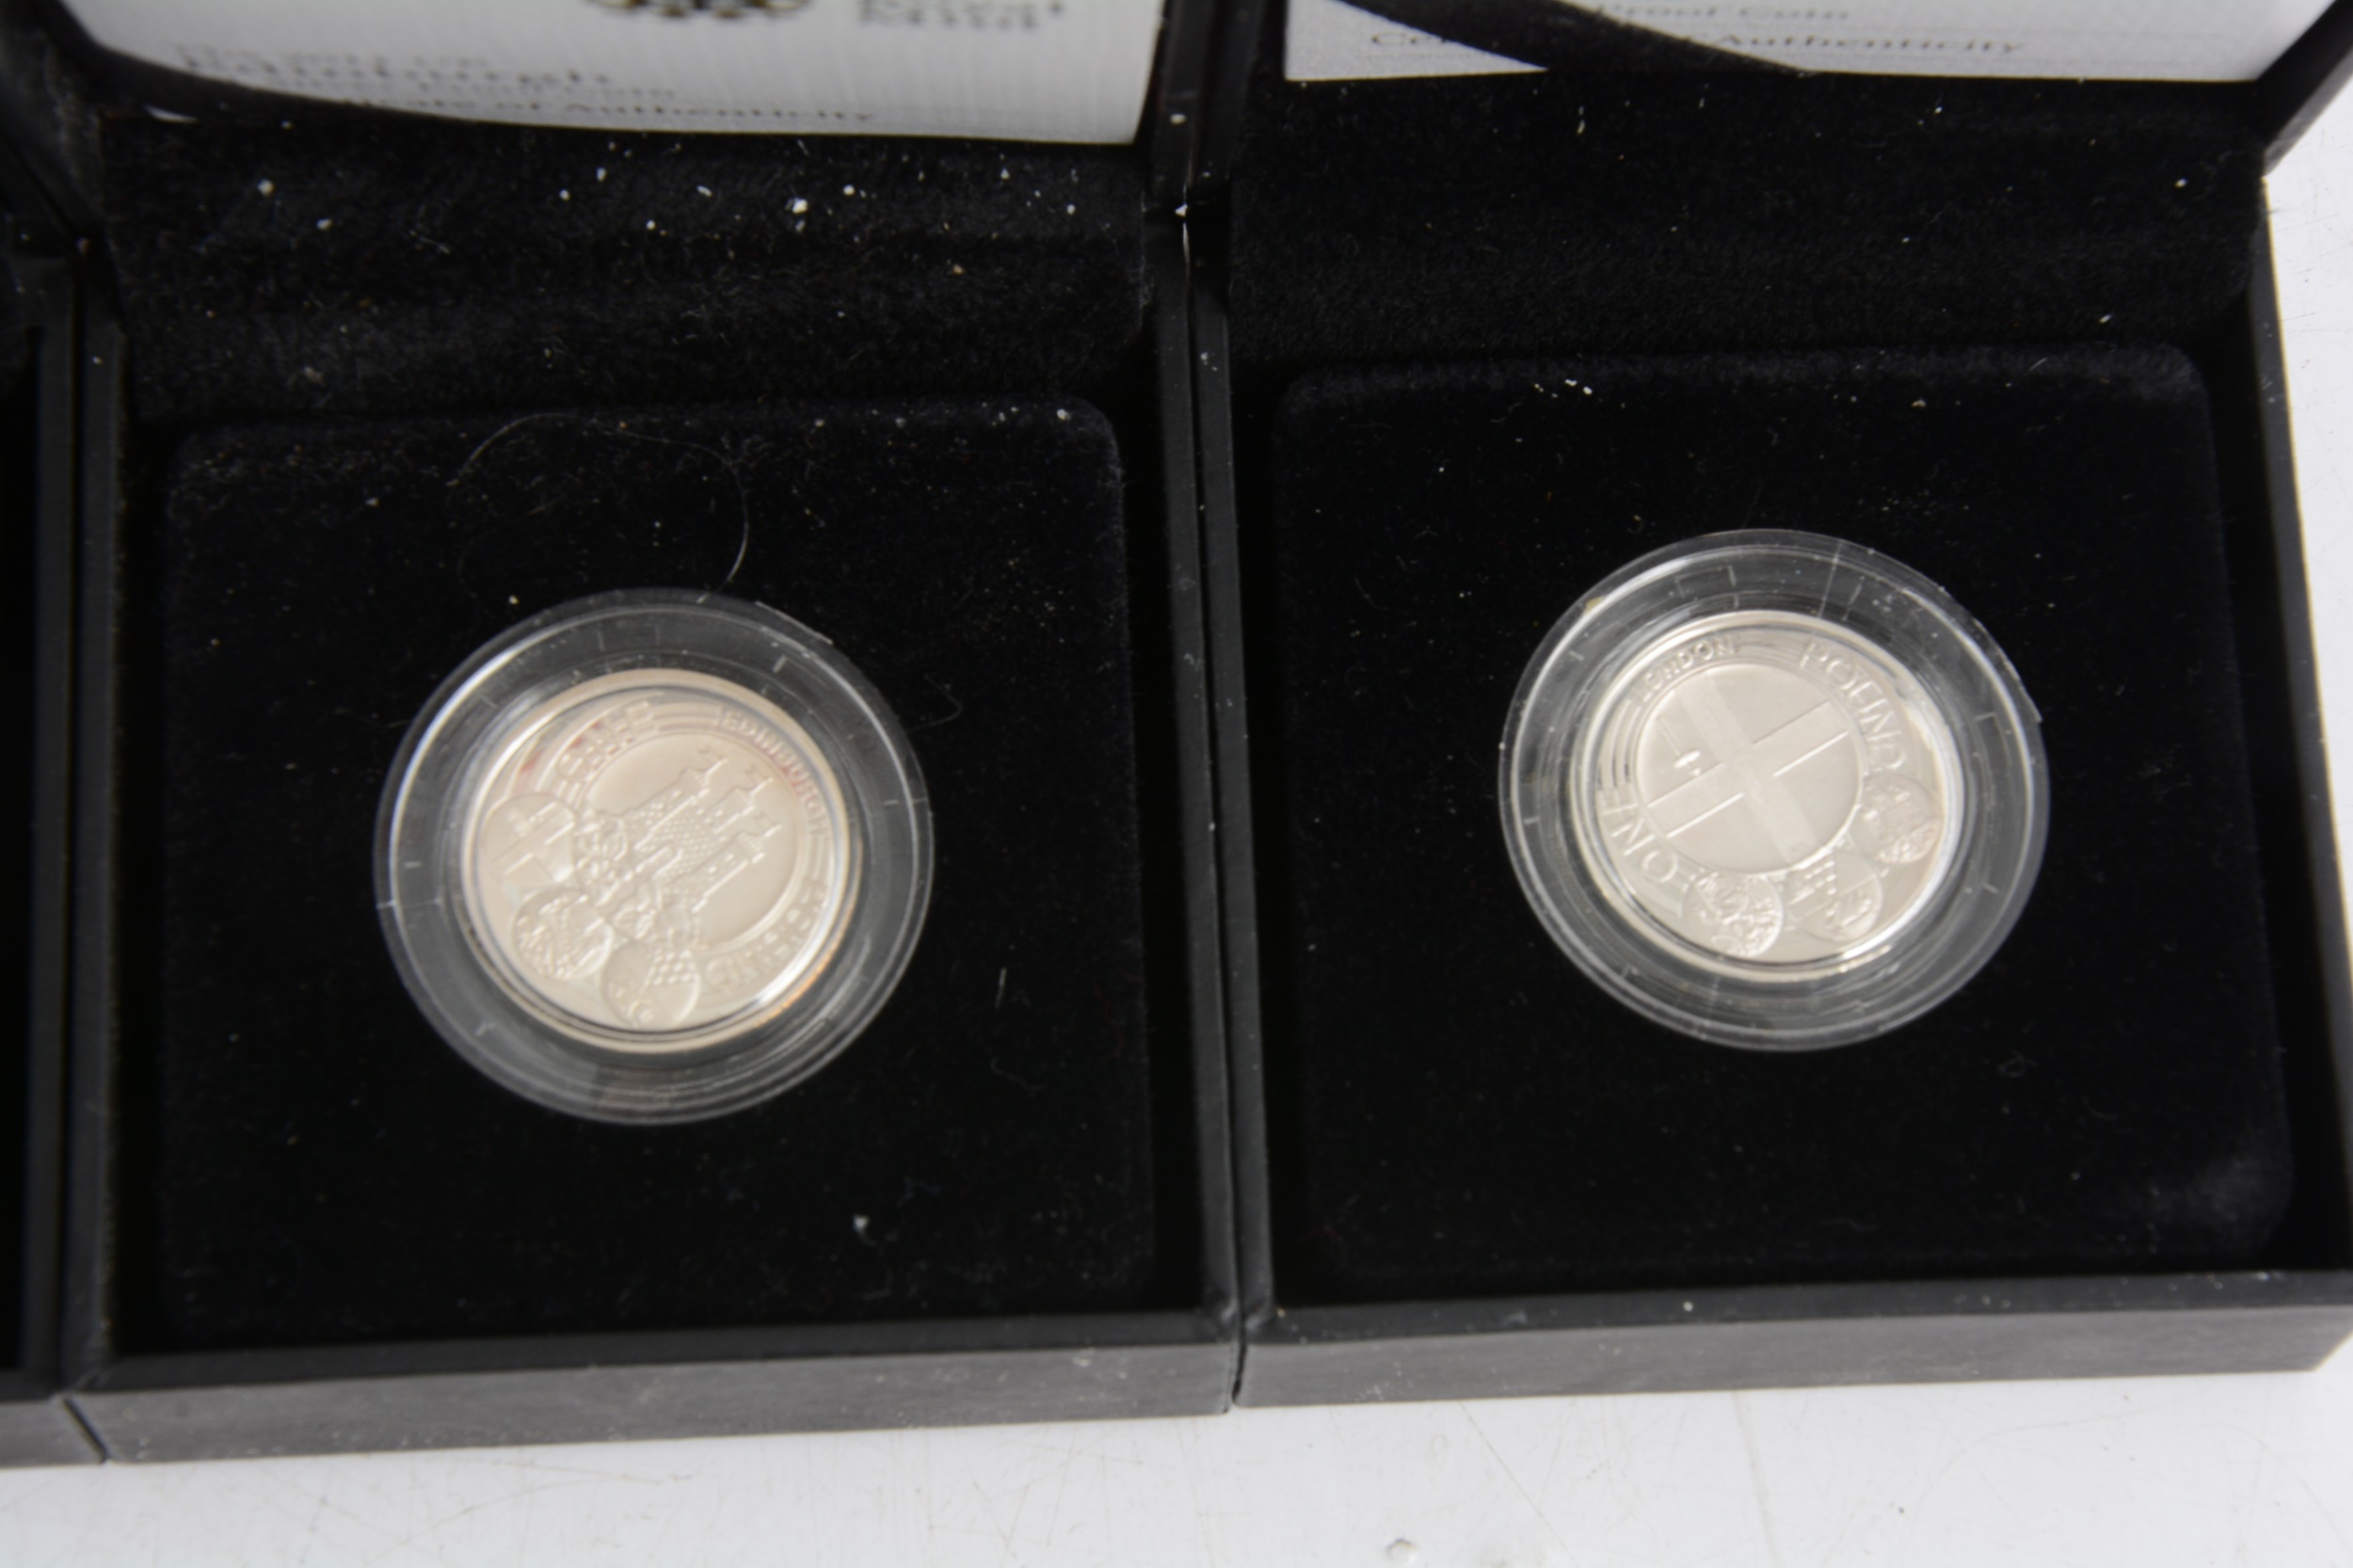 The Royal Mint - Four Silver Proof One Pound Coins, reverse designer Stuart Devlin, DNA Double - Image 3 of 4